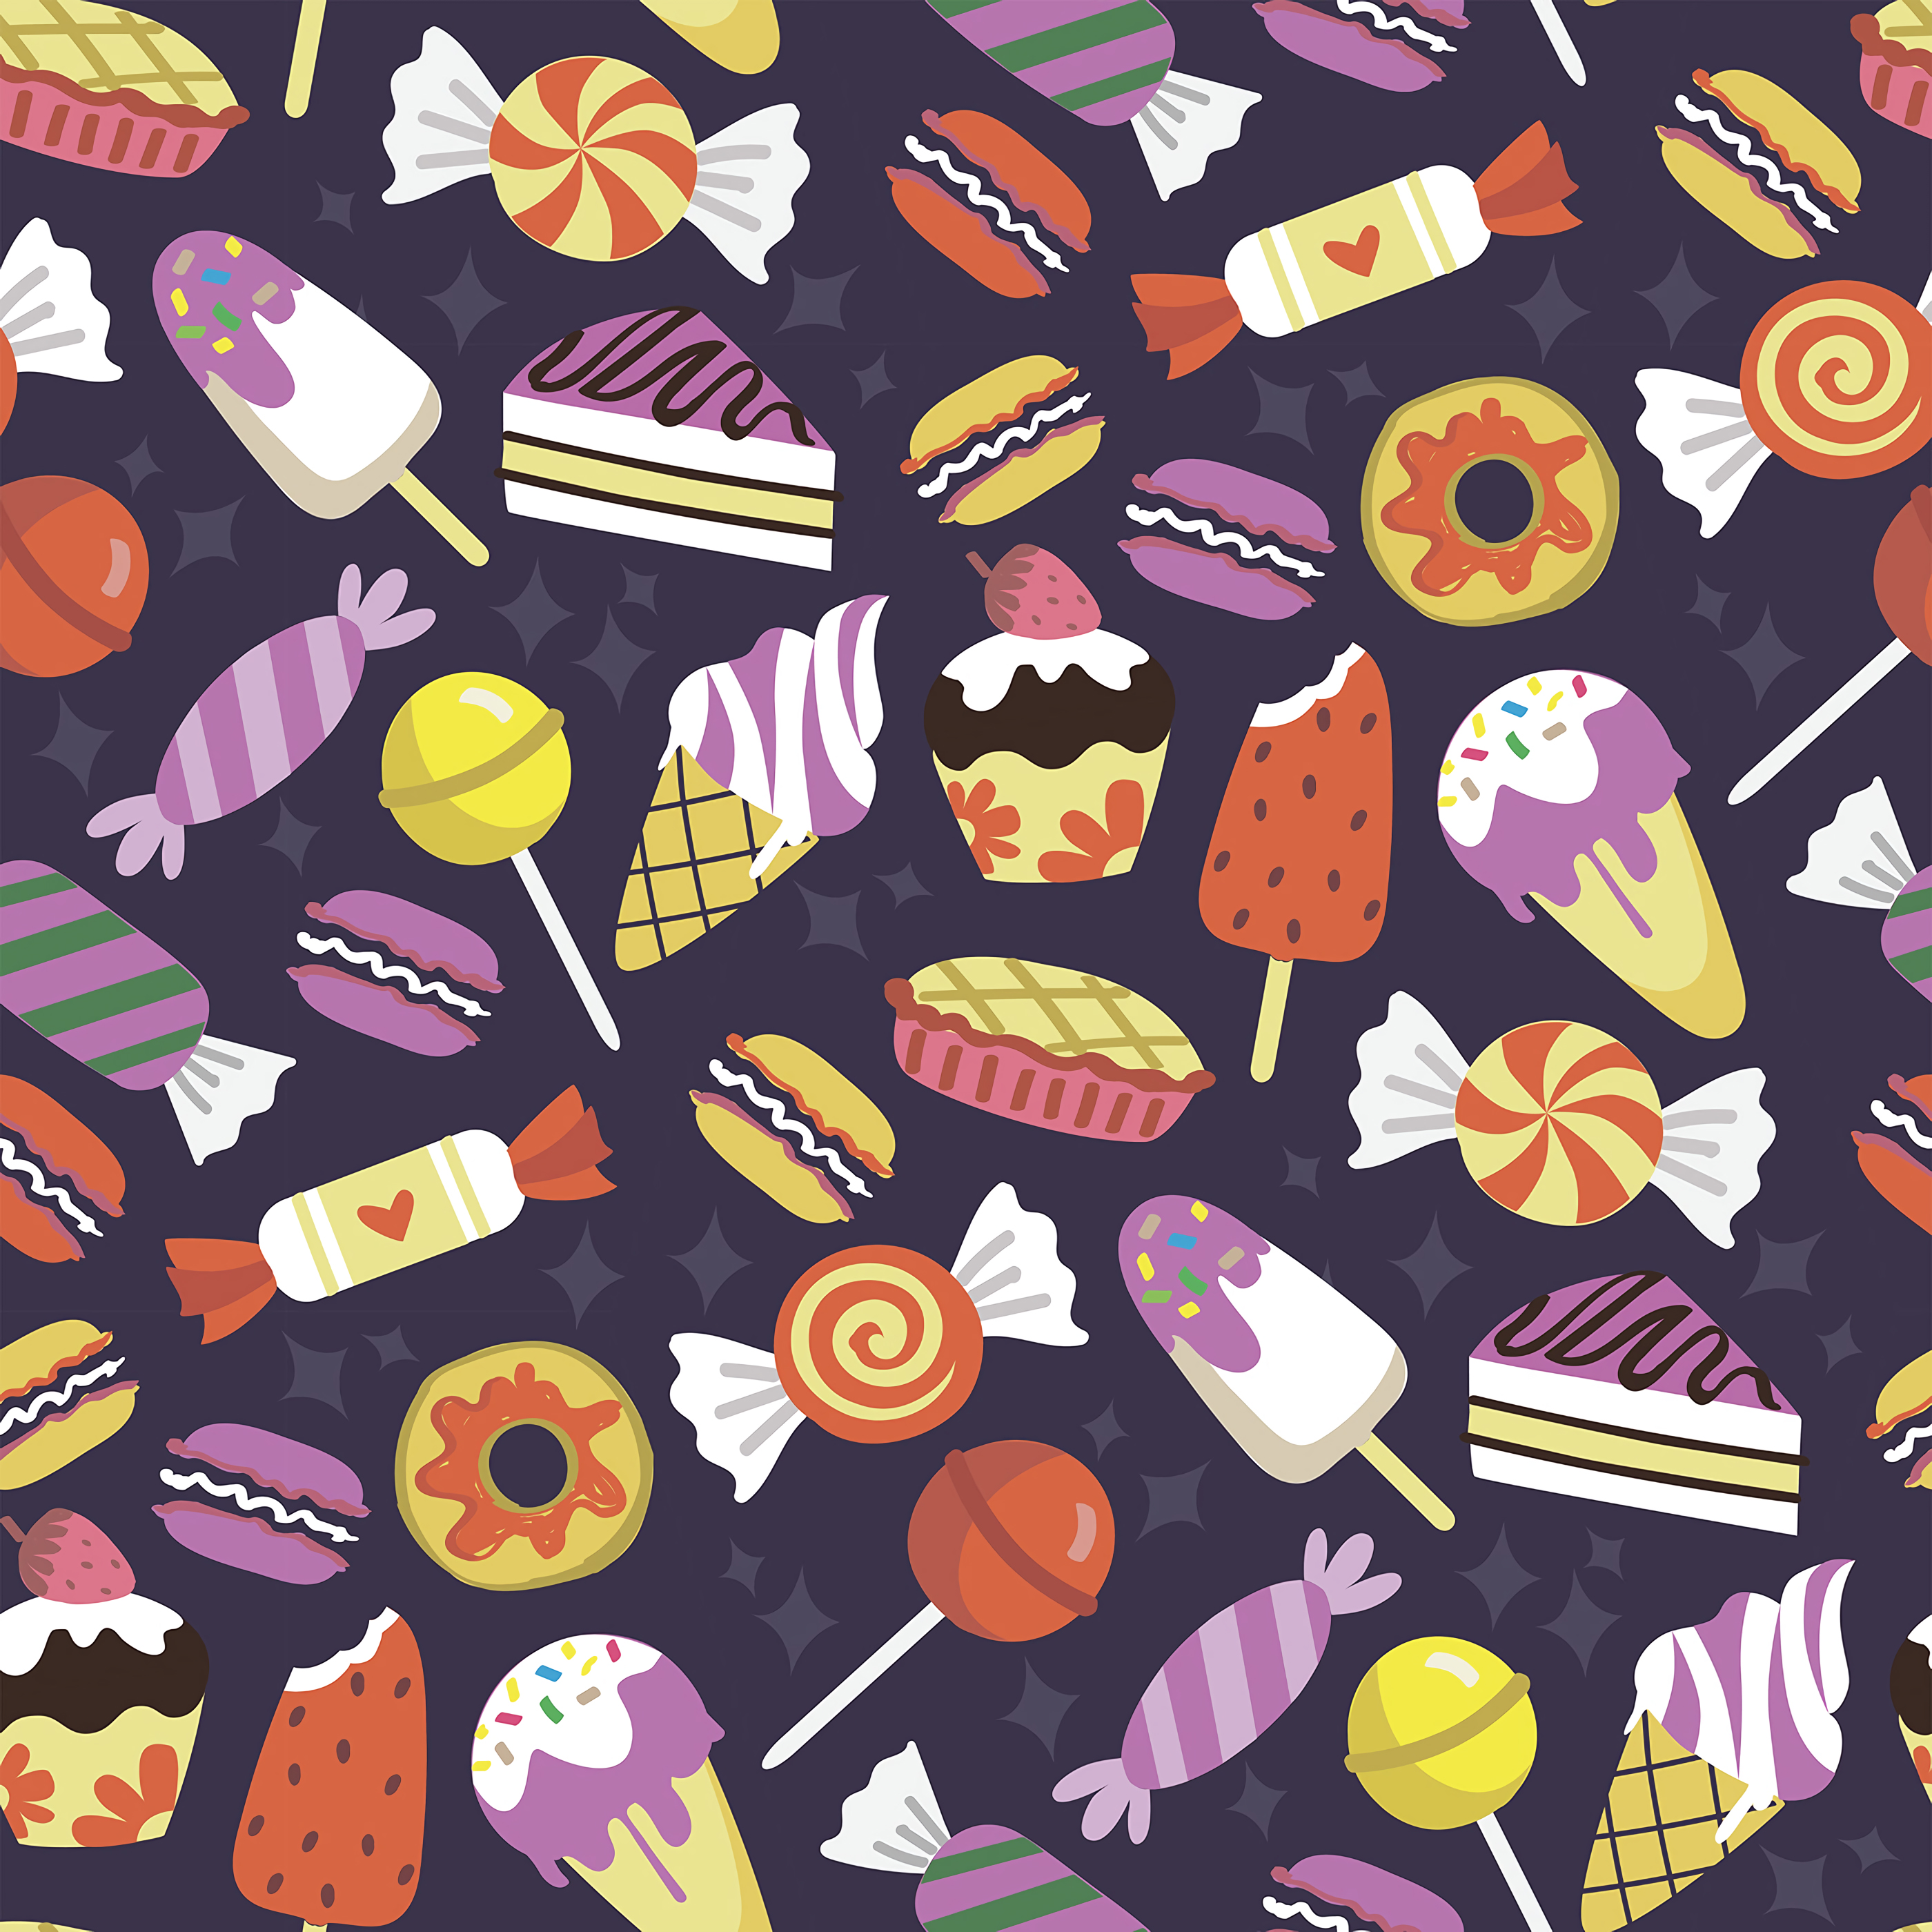 134834 download wallpaper candies, ice cream, cookies, pattern, texture, textures, cupcakes screensavers and pictures for free